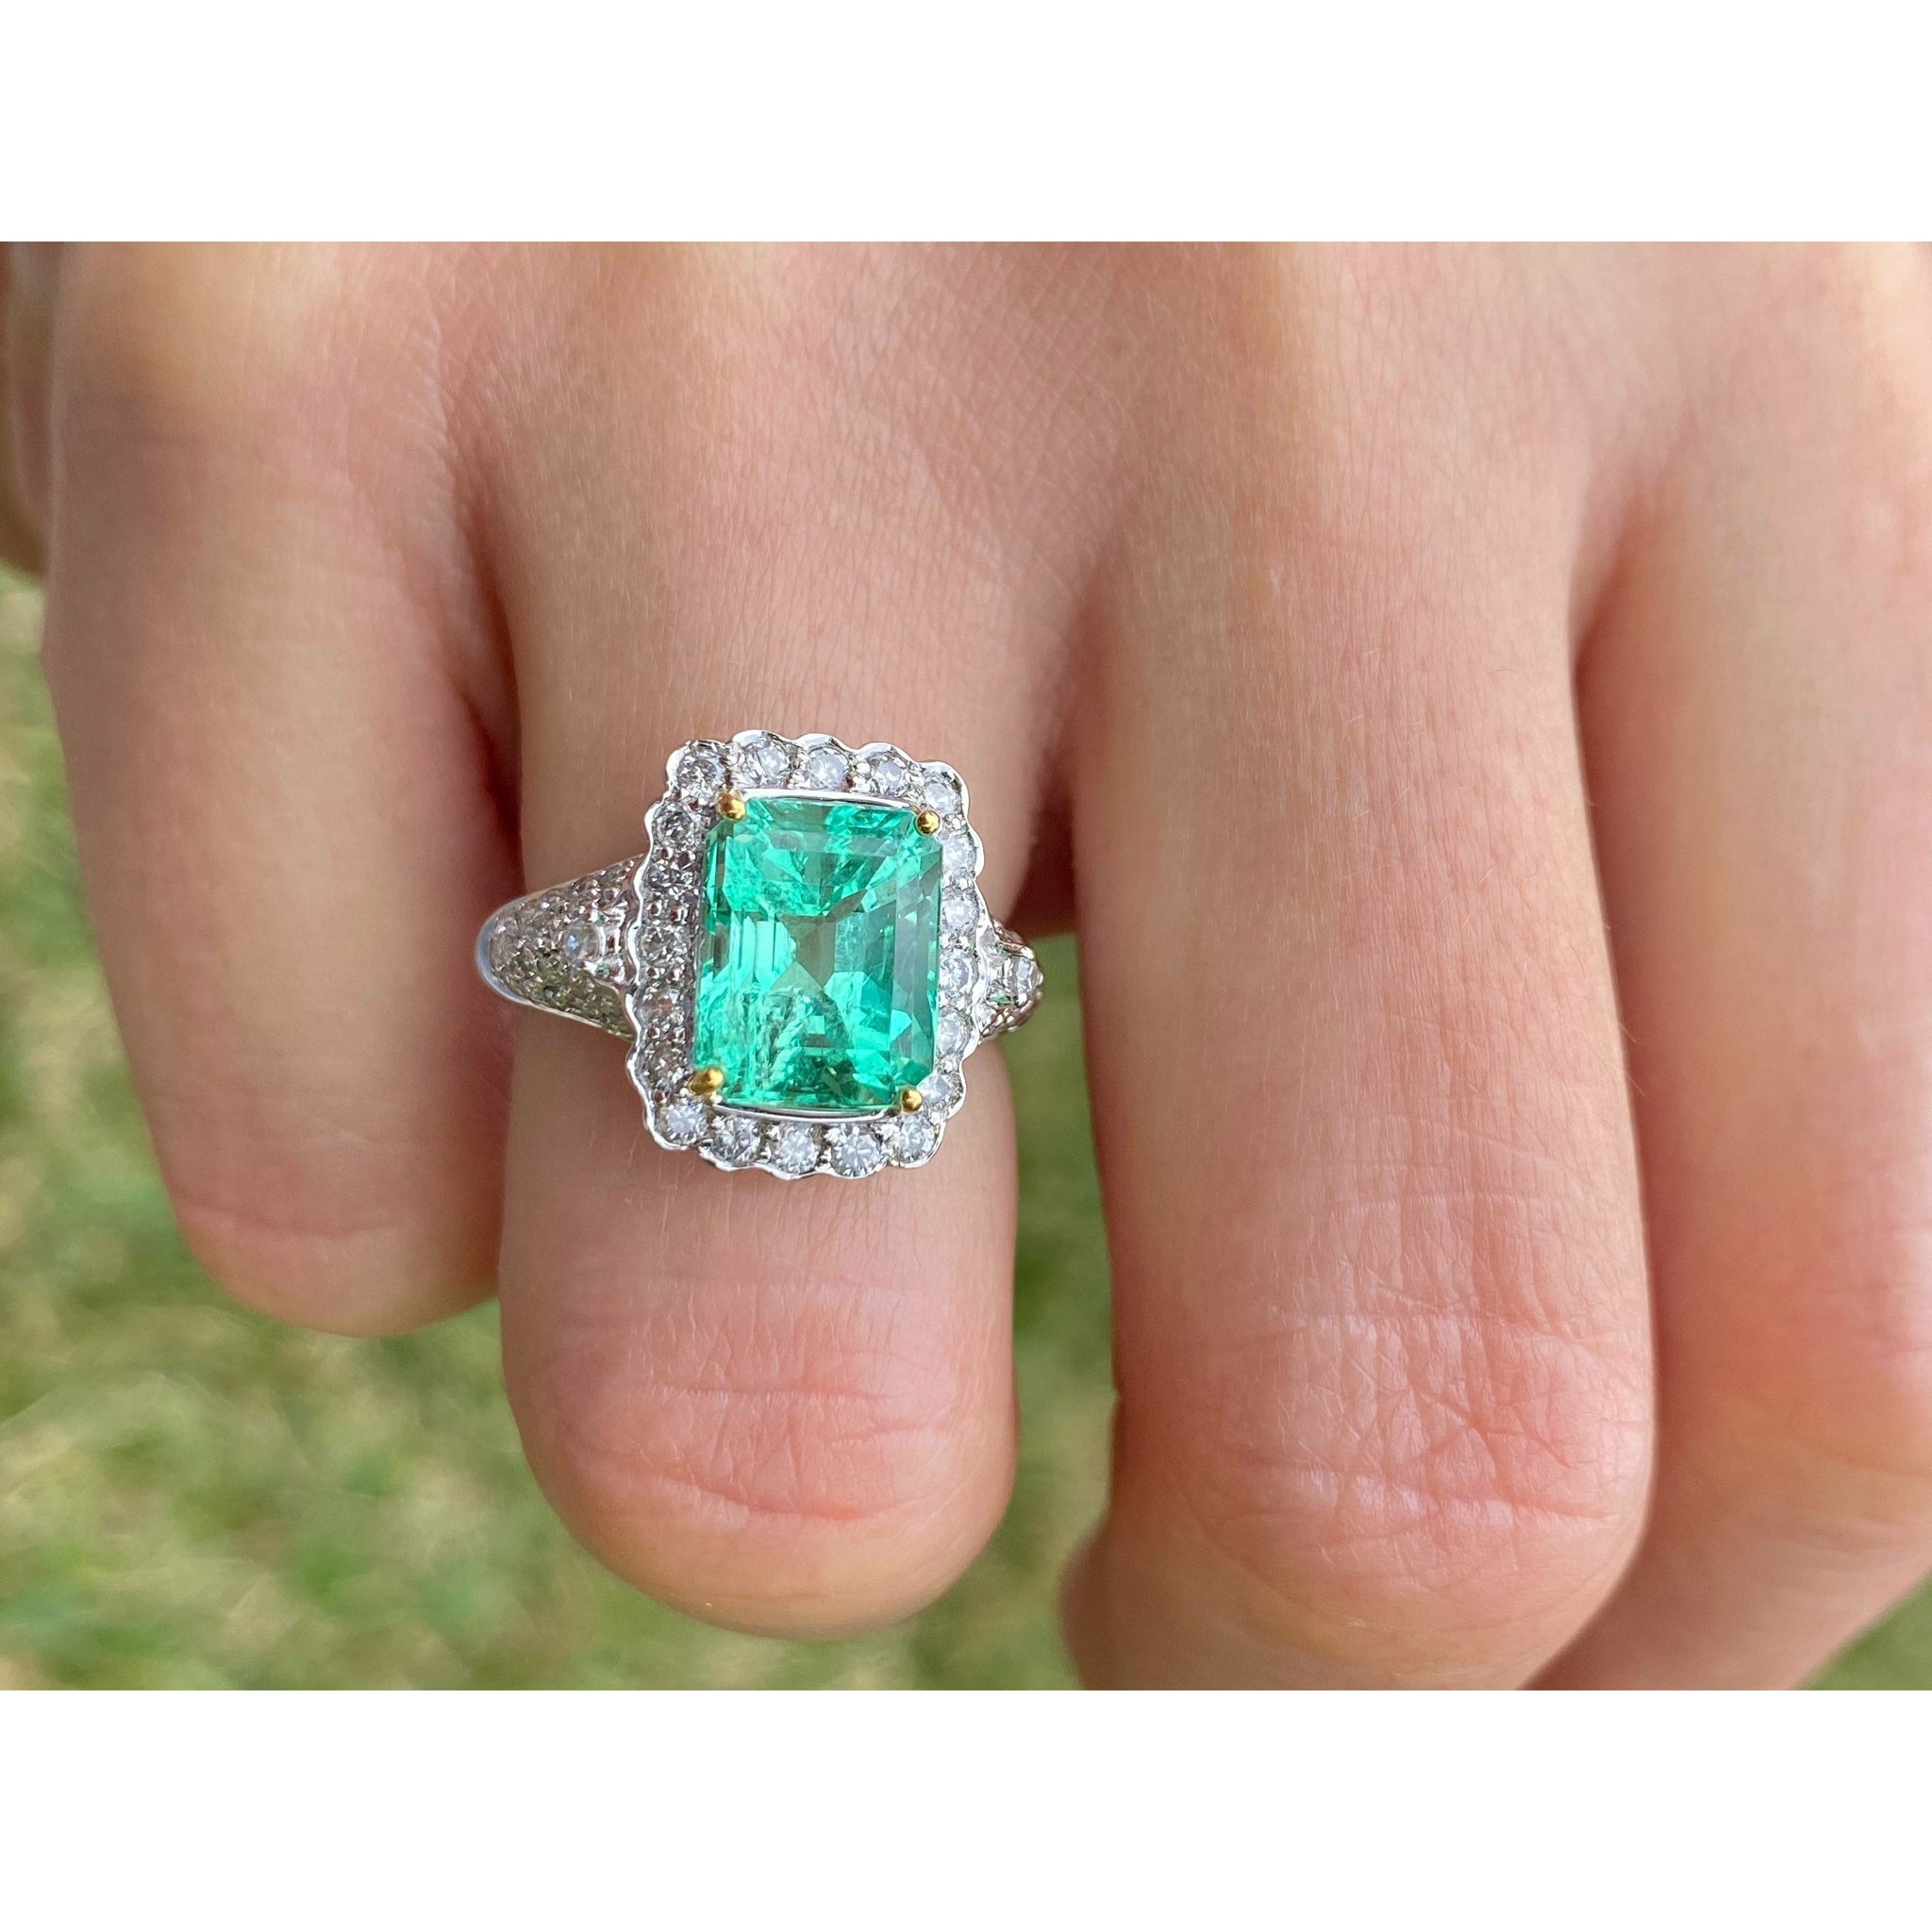 Vintage 3.58 Carat Emerald and Diamond Cocktail Ring in 18k White Gold - ASSAY